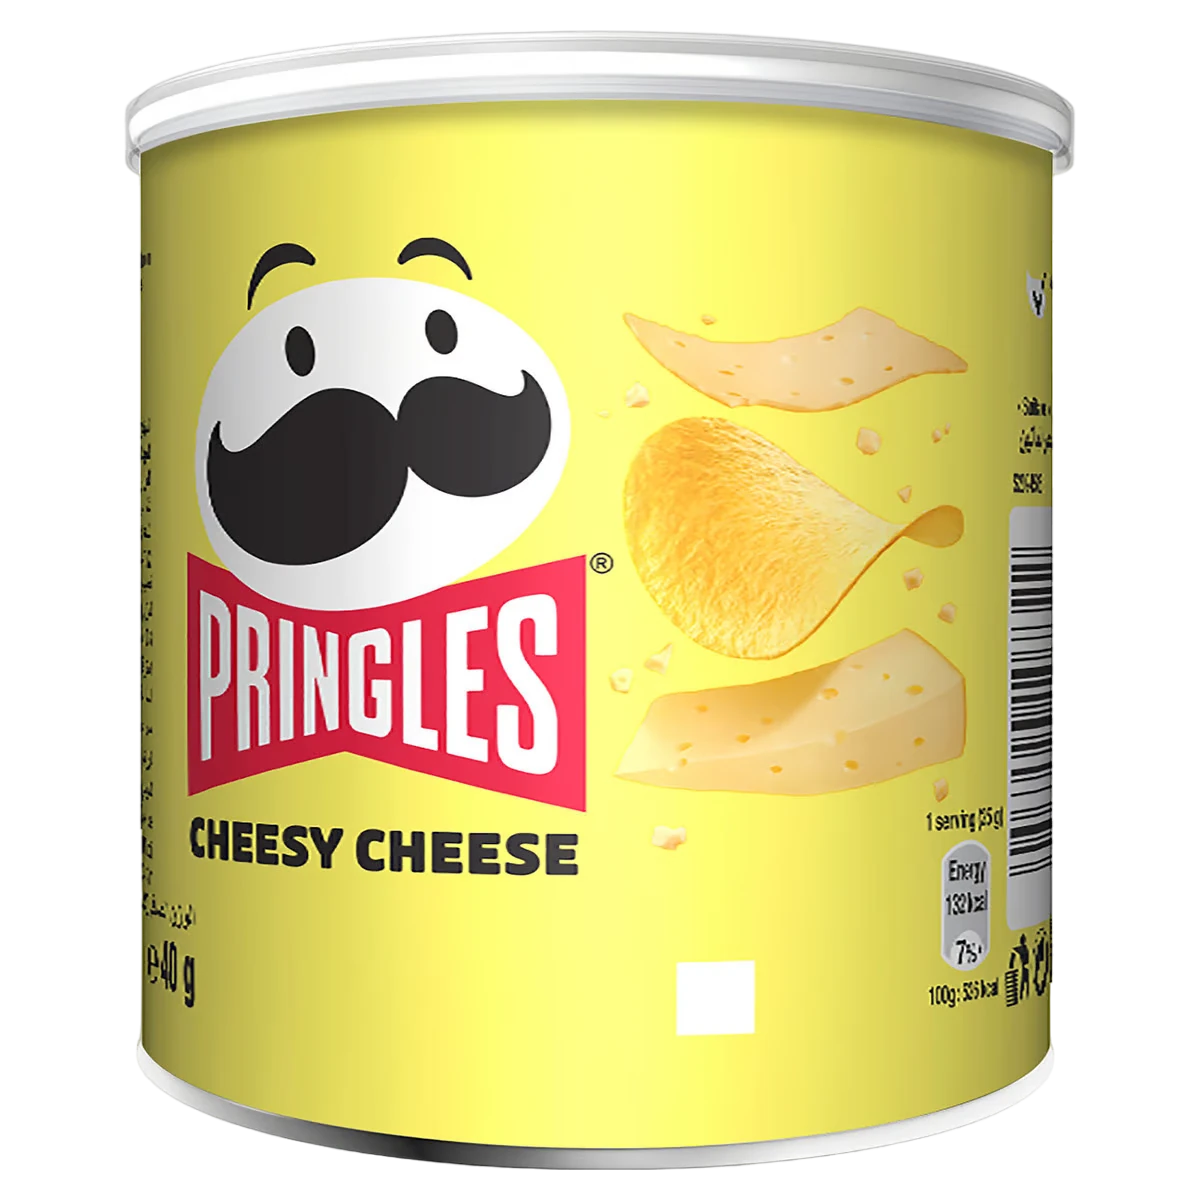 Pringles Cheesy Cheese Flavour 40g